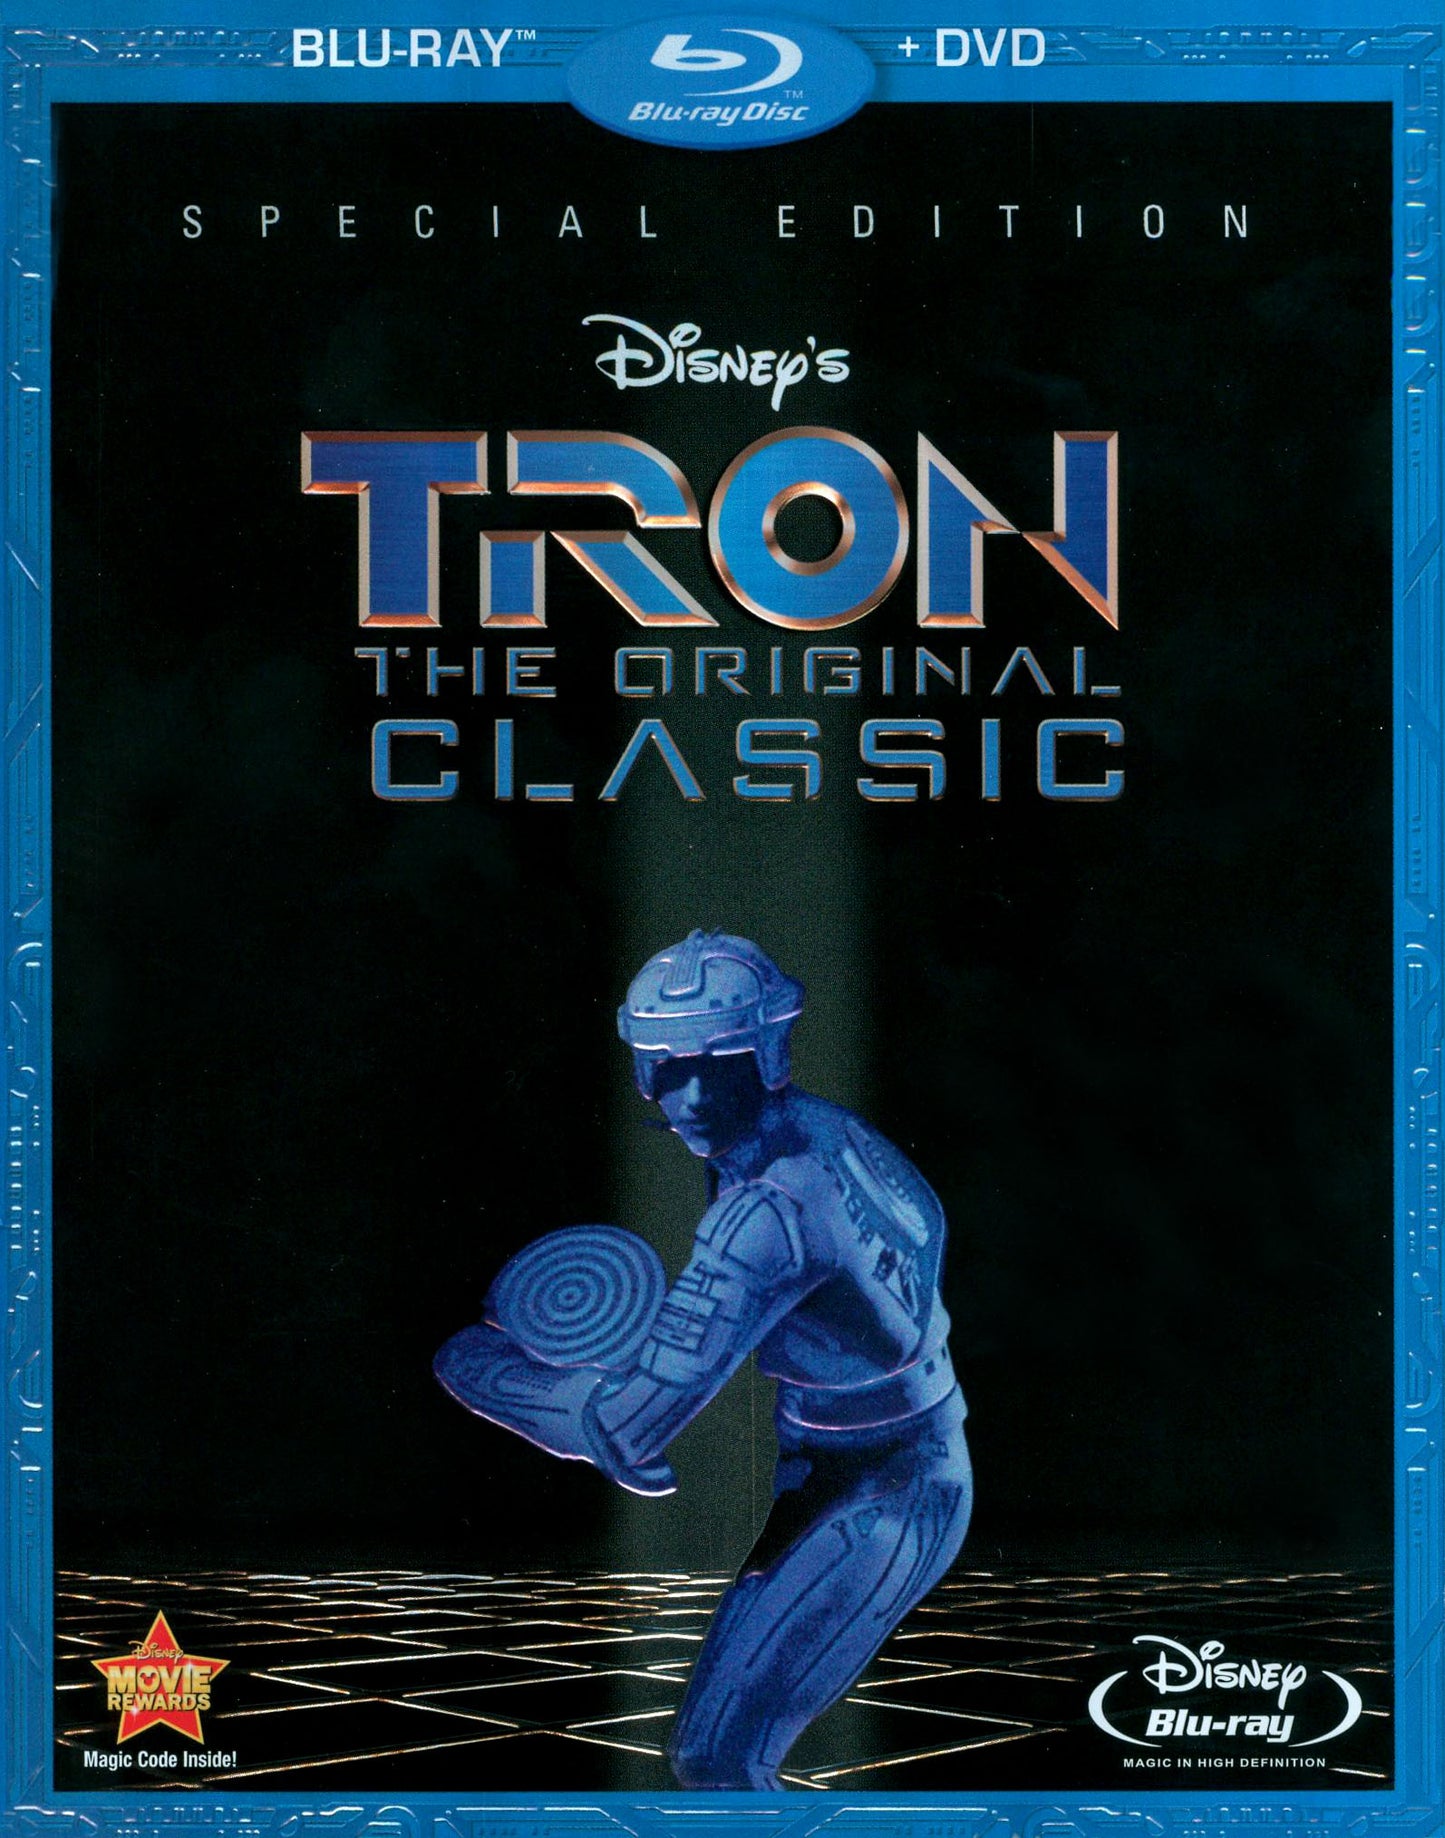 Tron [Special Edition] [2 Discs] [Blu-ray/DVD] cover art